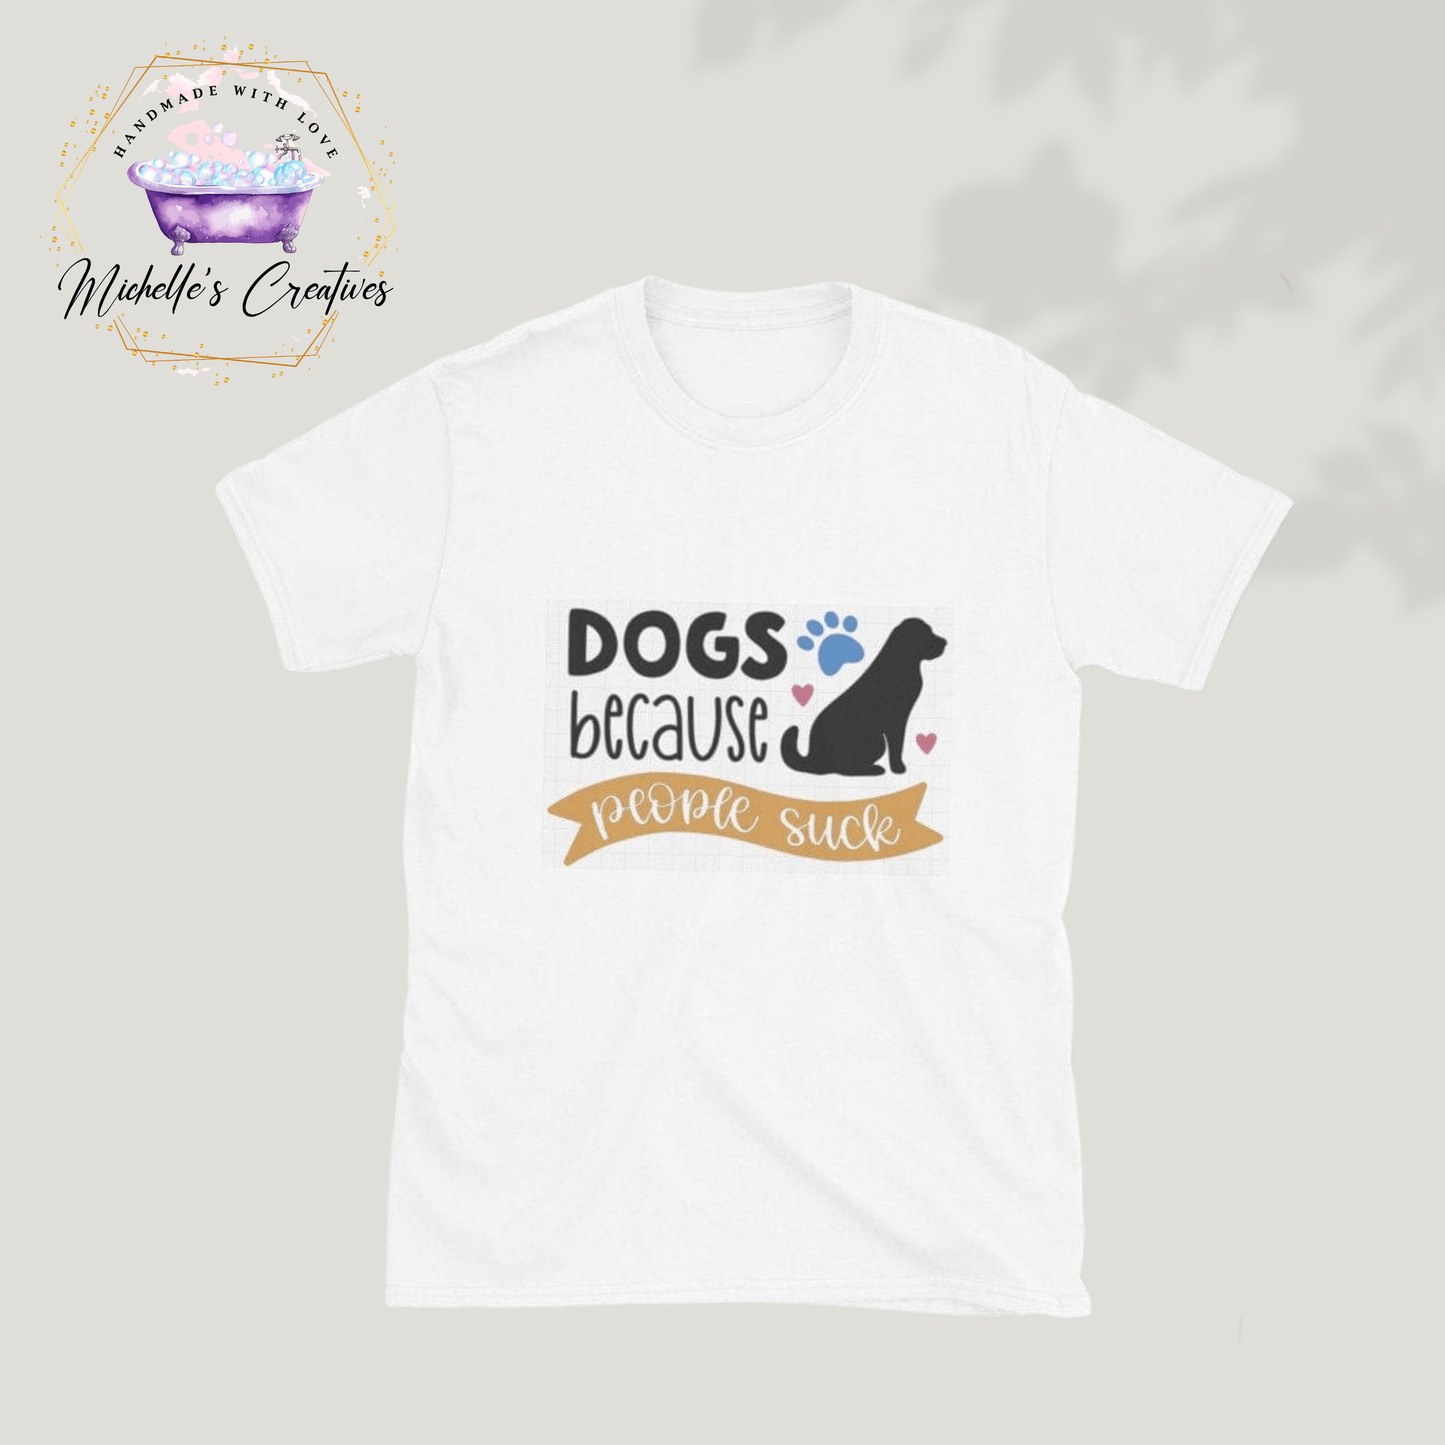 Michelle's Creatives Love Dogs Because People Suck Short-Sleeve Unisex T-Shirt